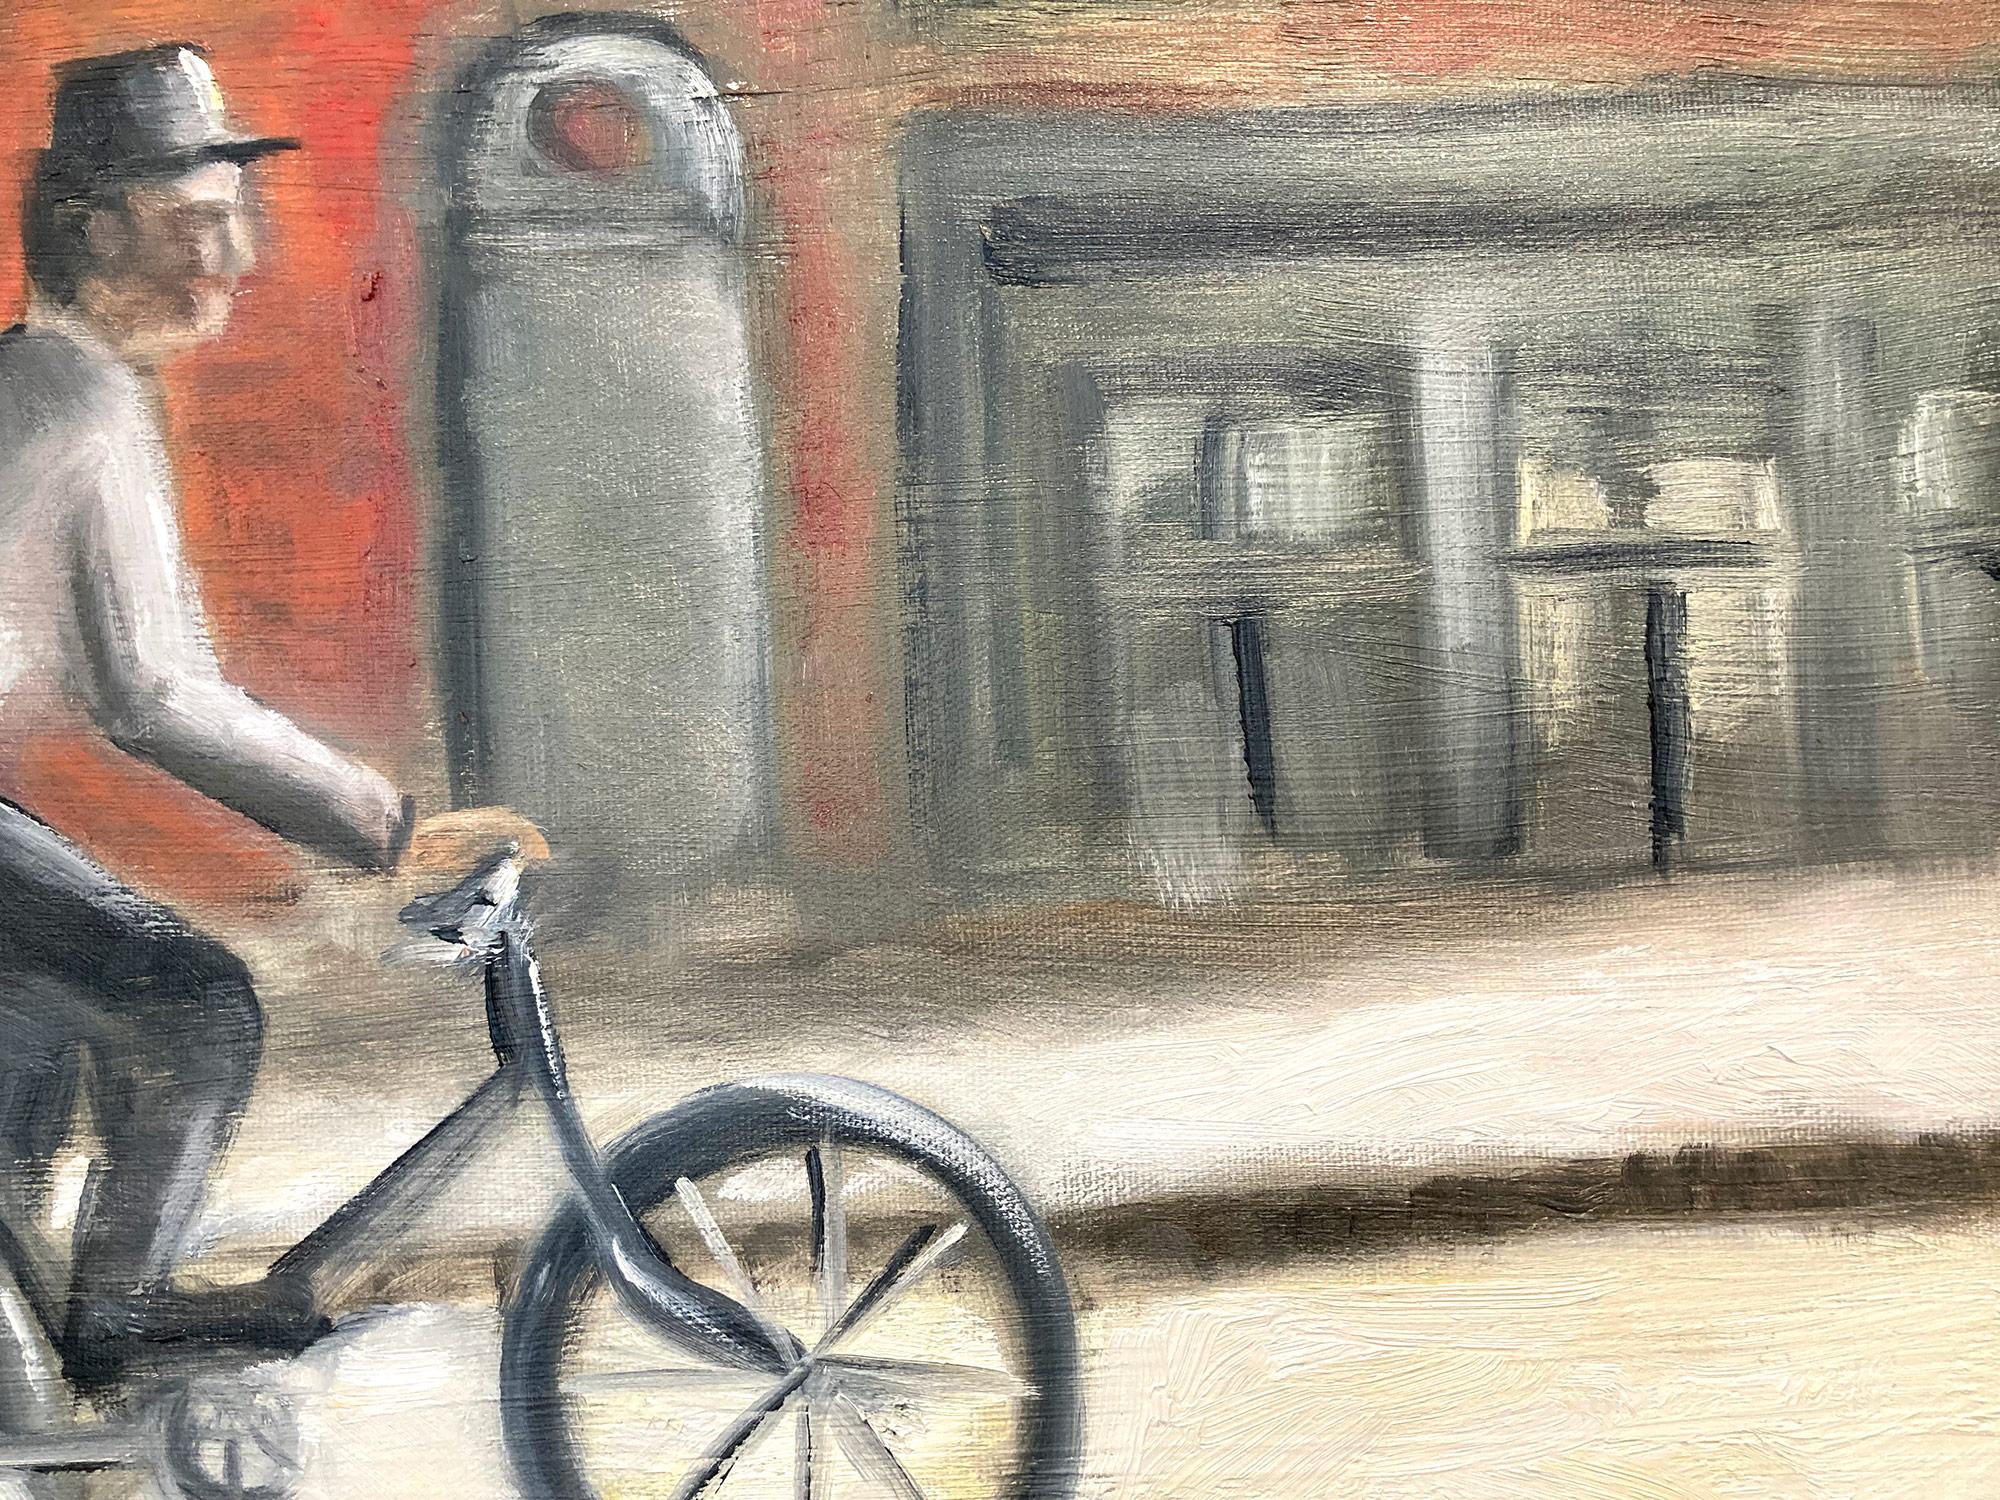 This painting depicts an impressionistic street scene of a man with hat riding up Notting Hill. The thick brush strokes and fun marks creates an atmosphere reminiscent of the impressionists from the 20th Century, and moody shadows that also reminds